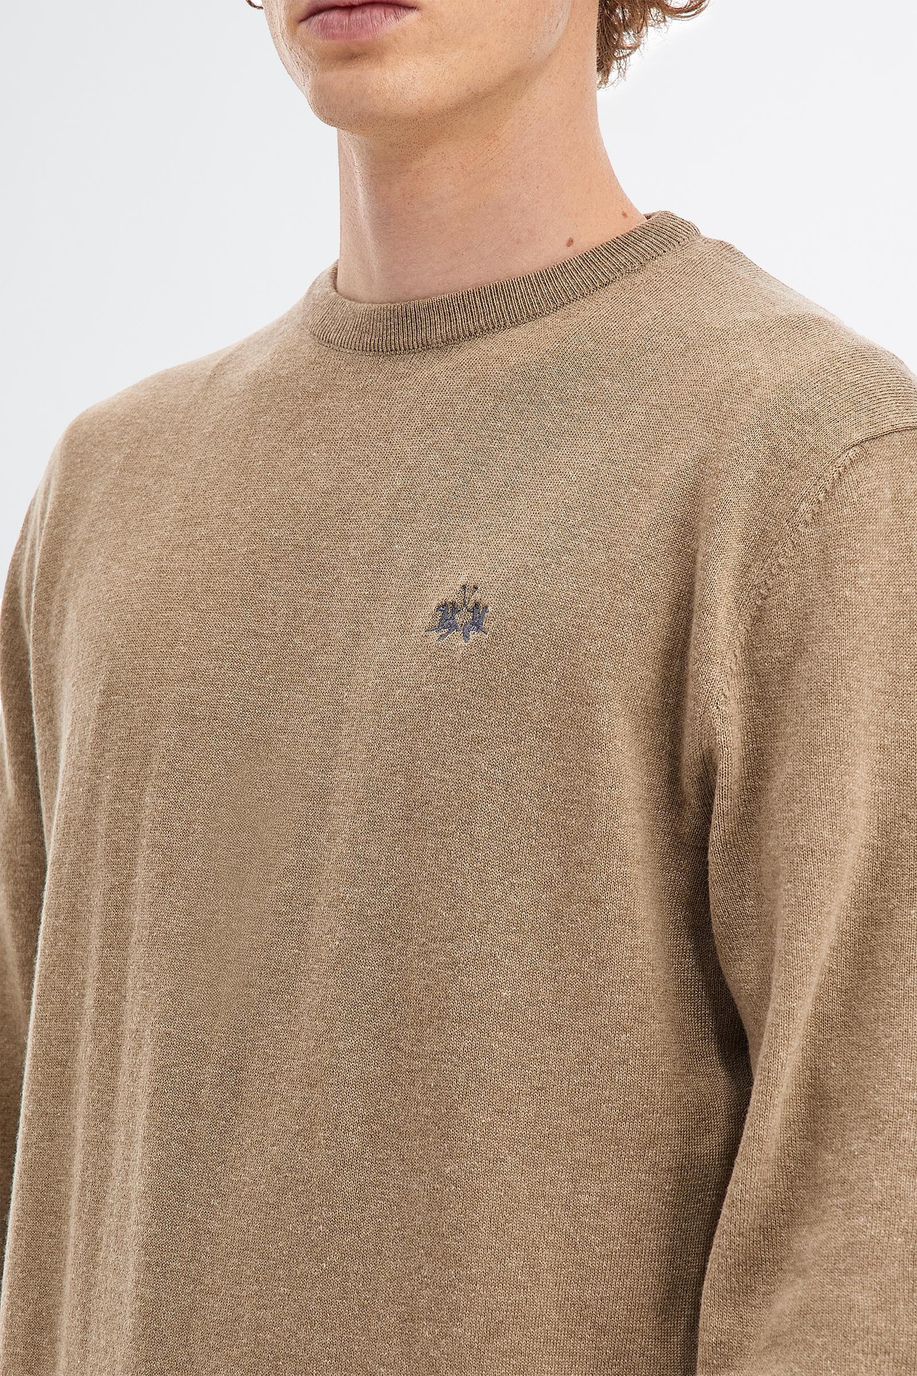 Men’s knit sweater with long sleeves in cotton blend wool regular fit crew neck - Knitwear | La Martina - Official Online Shop